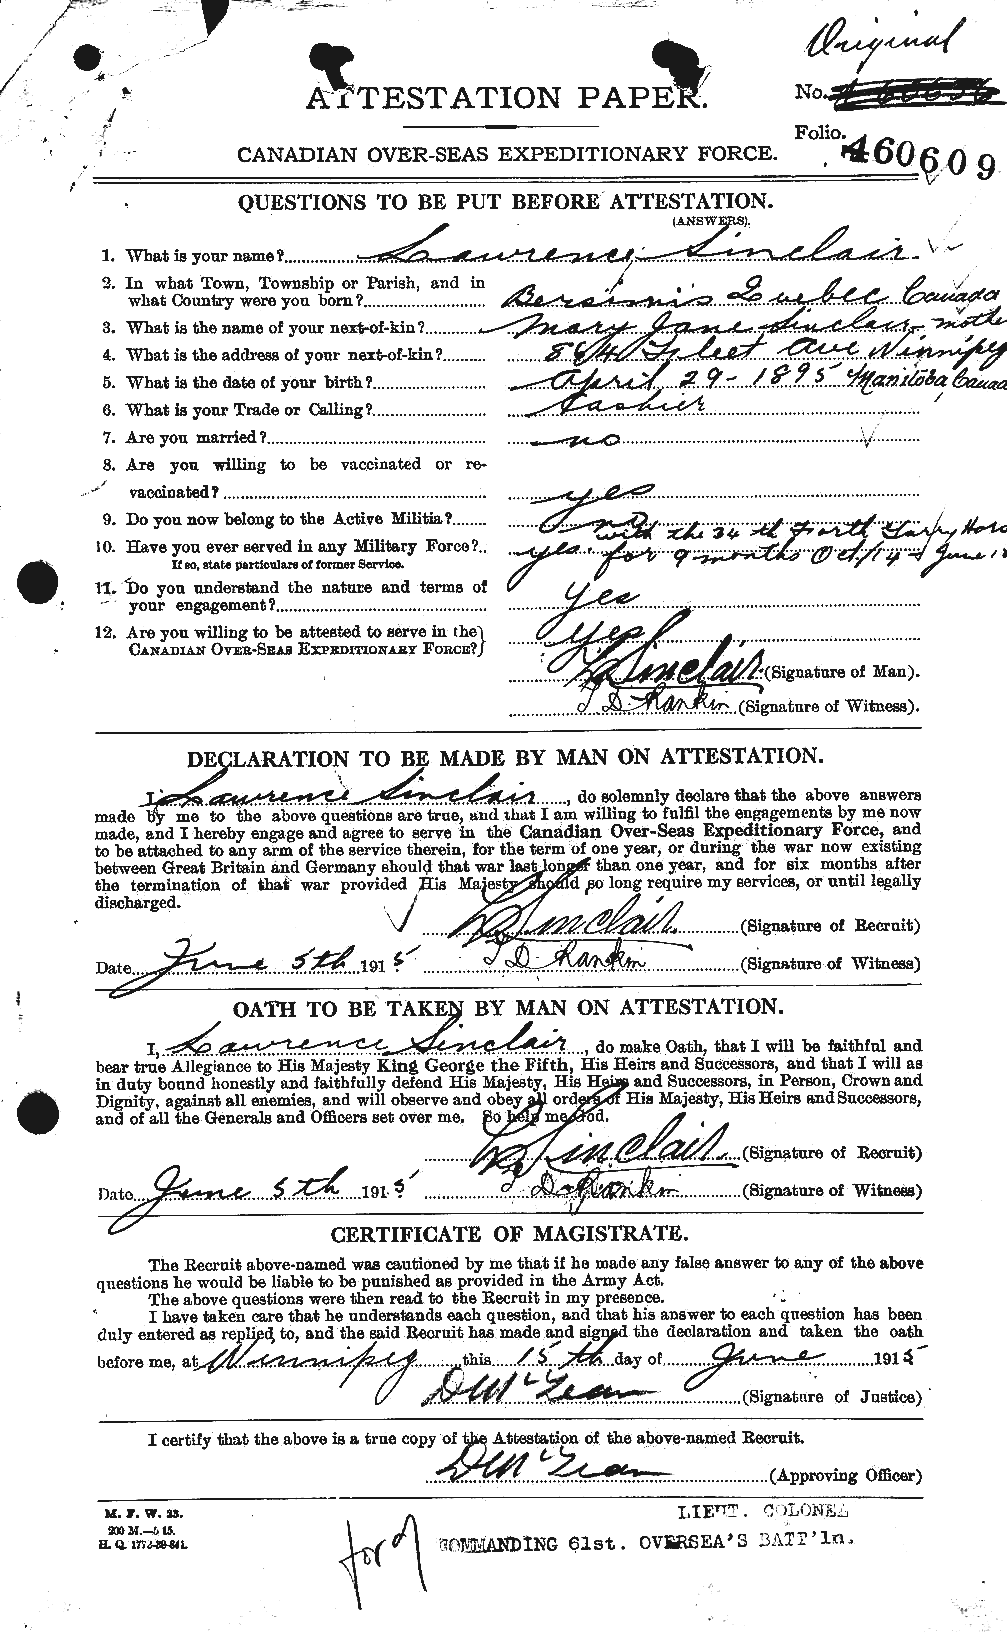 Personnel Records of the First World War - CEF 622478a